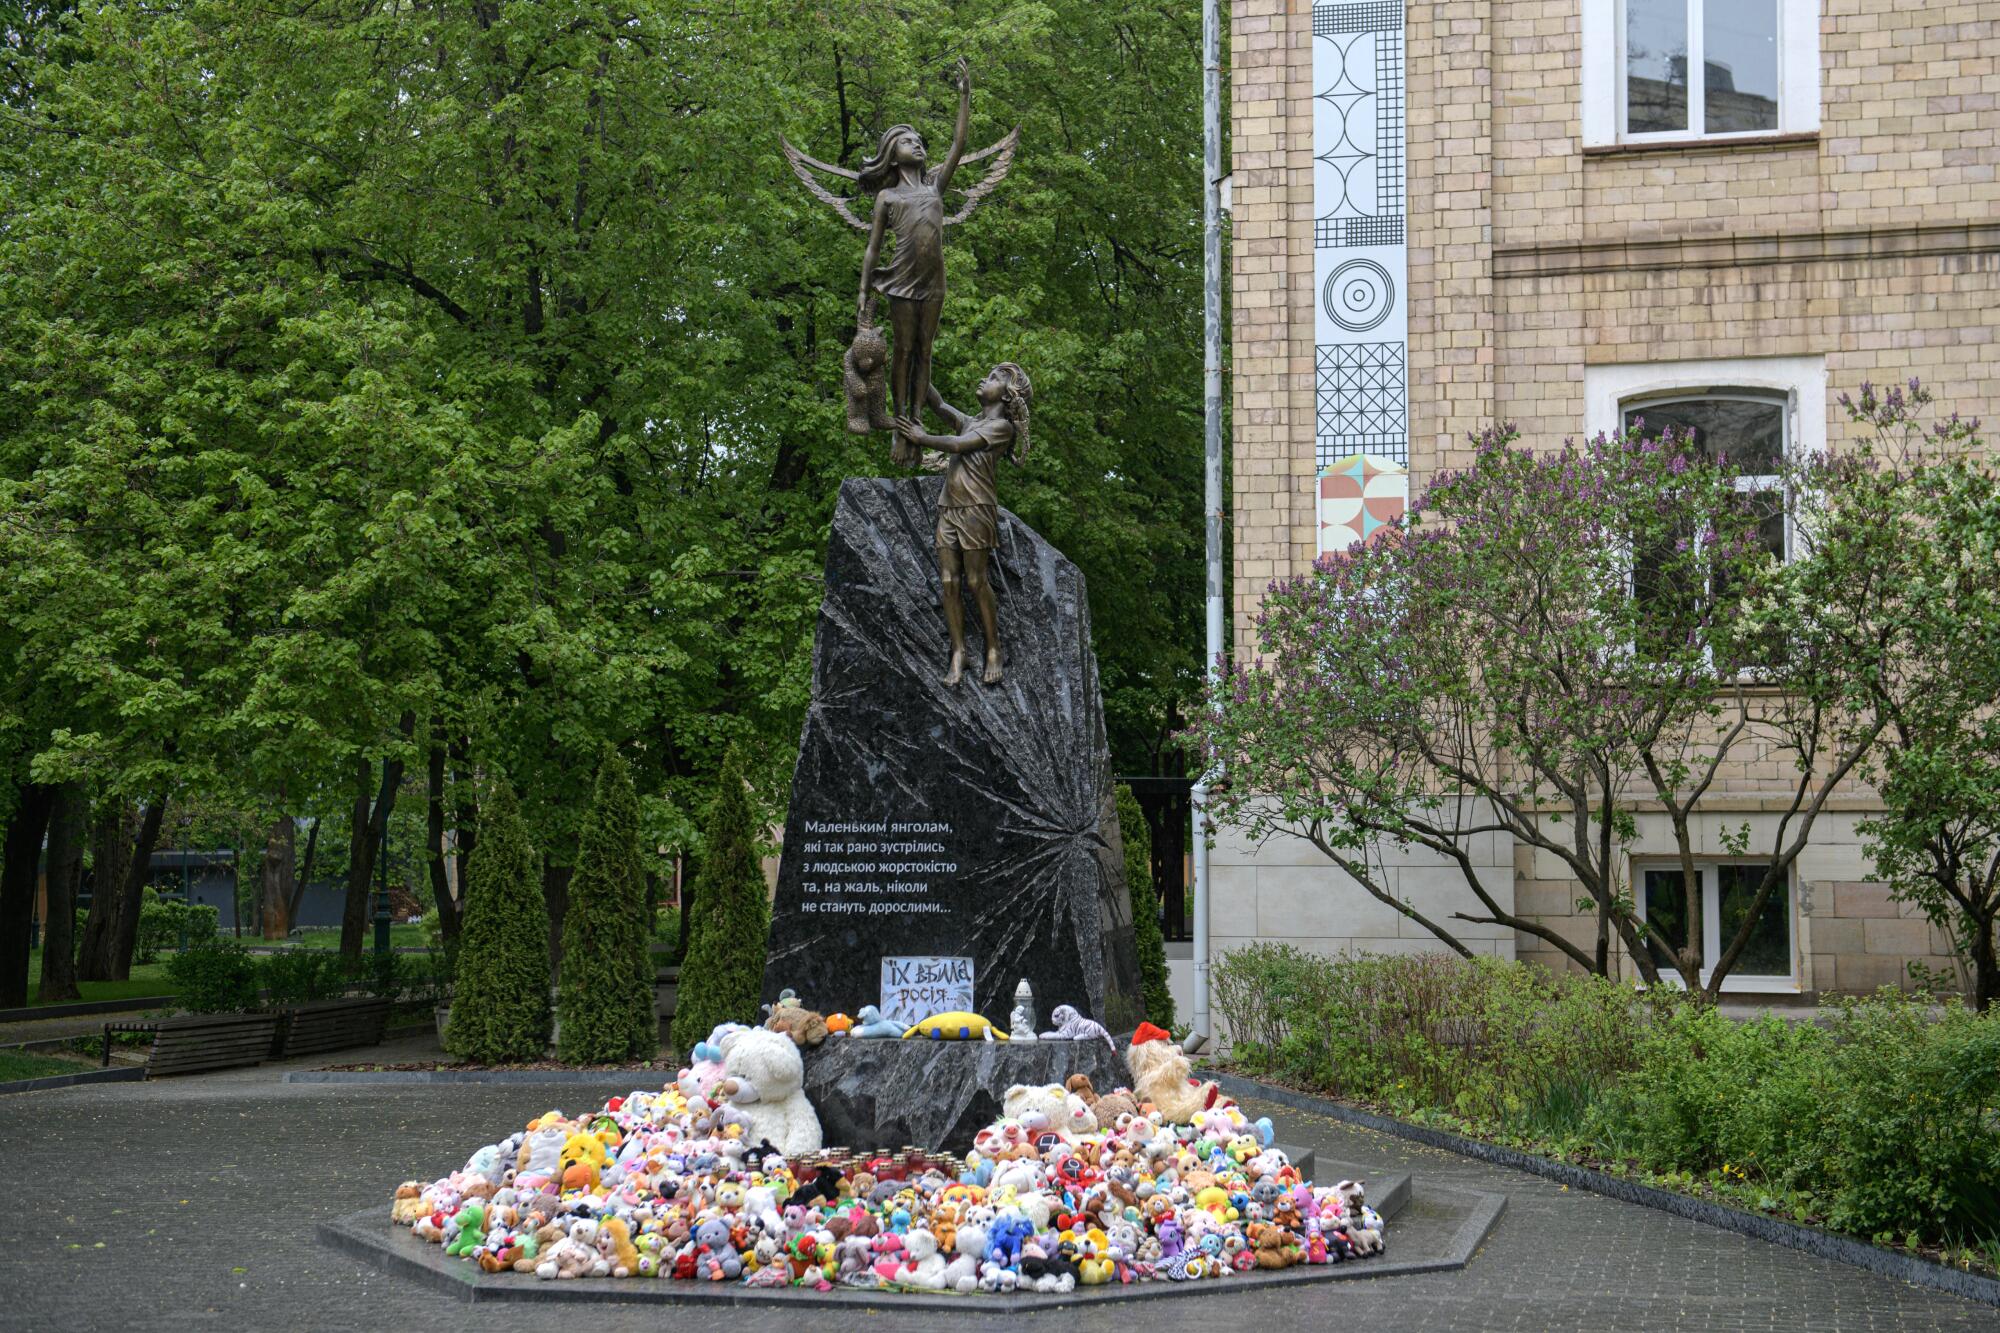 Teddy bears surround a monument in front of a building, near leafy trees.